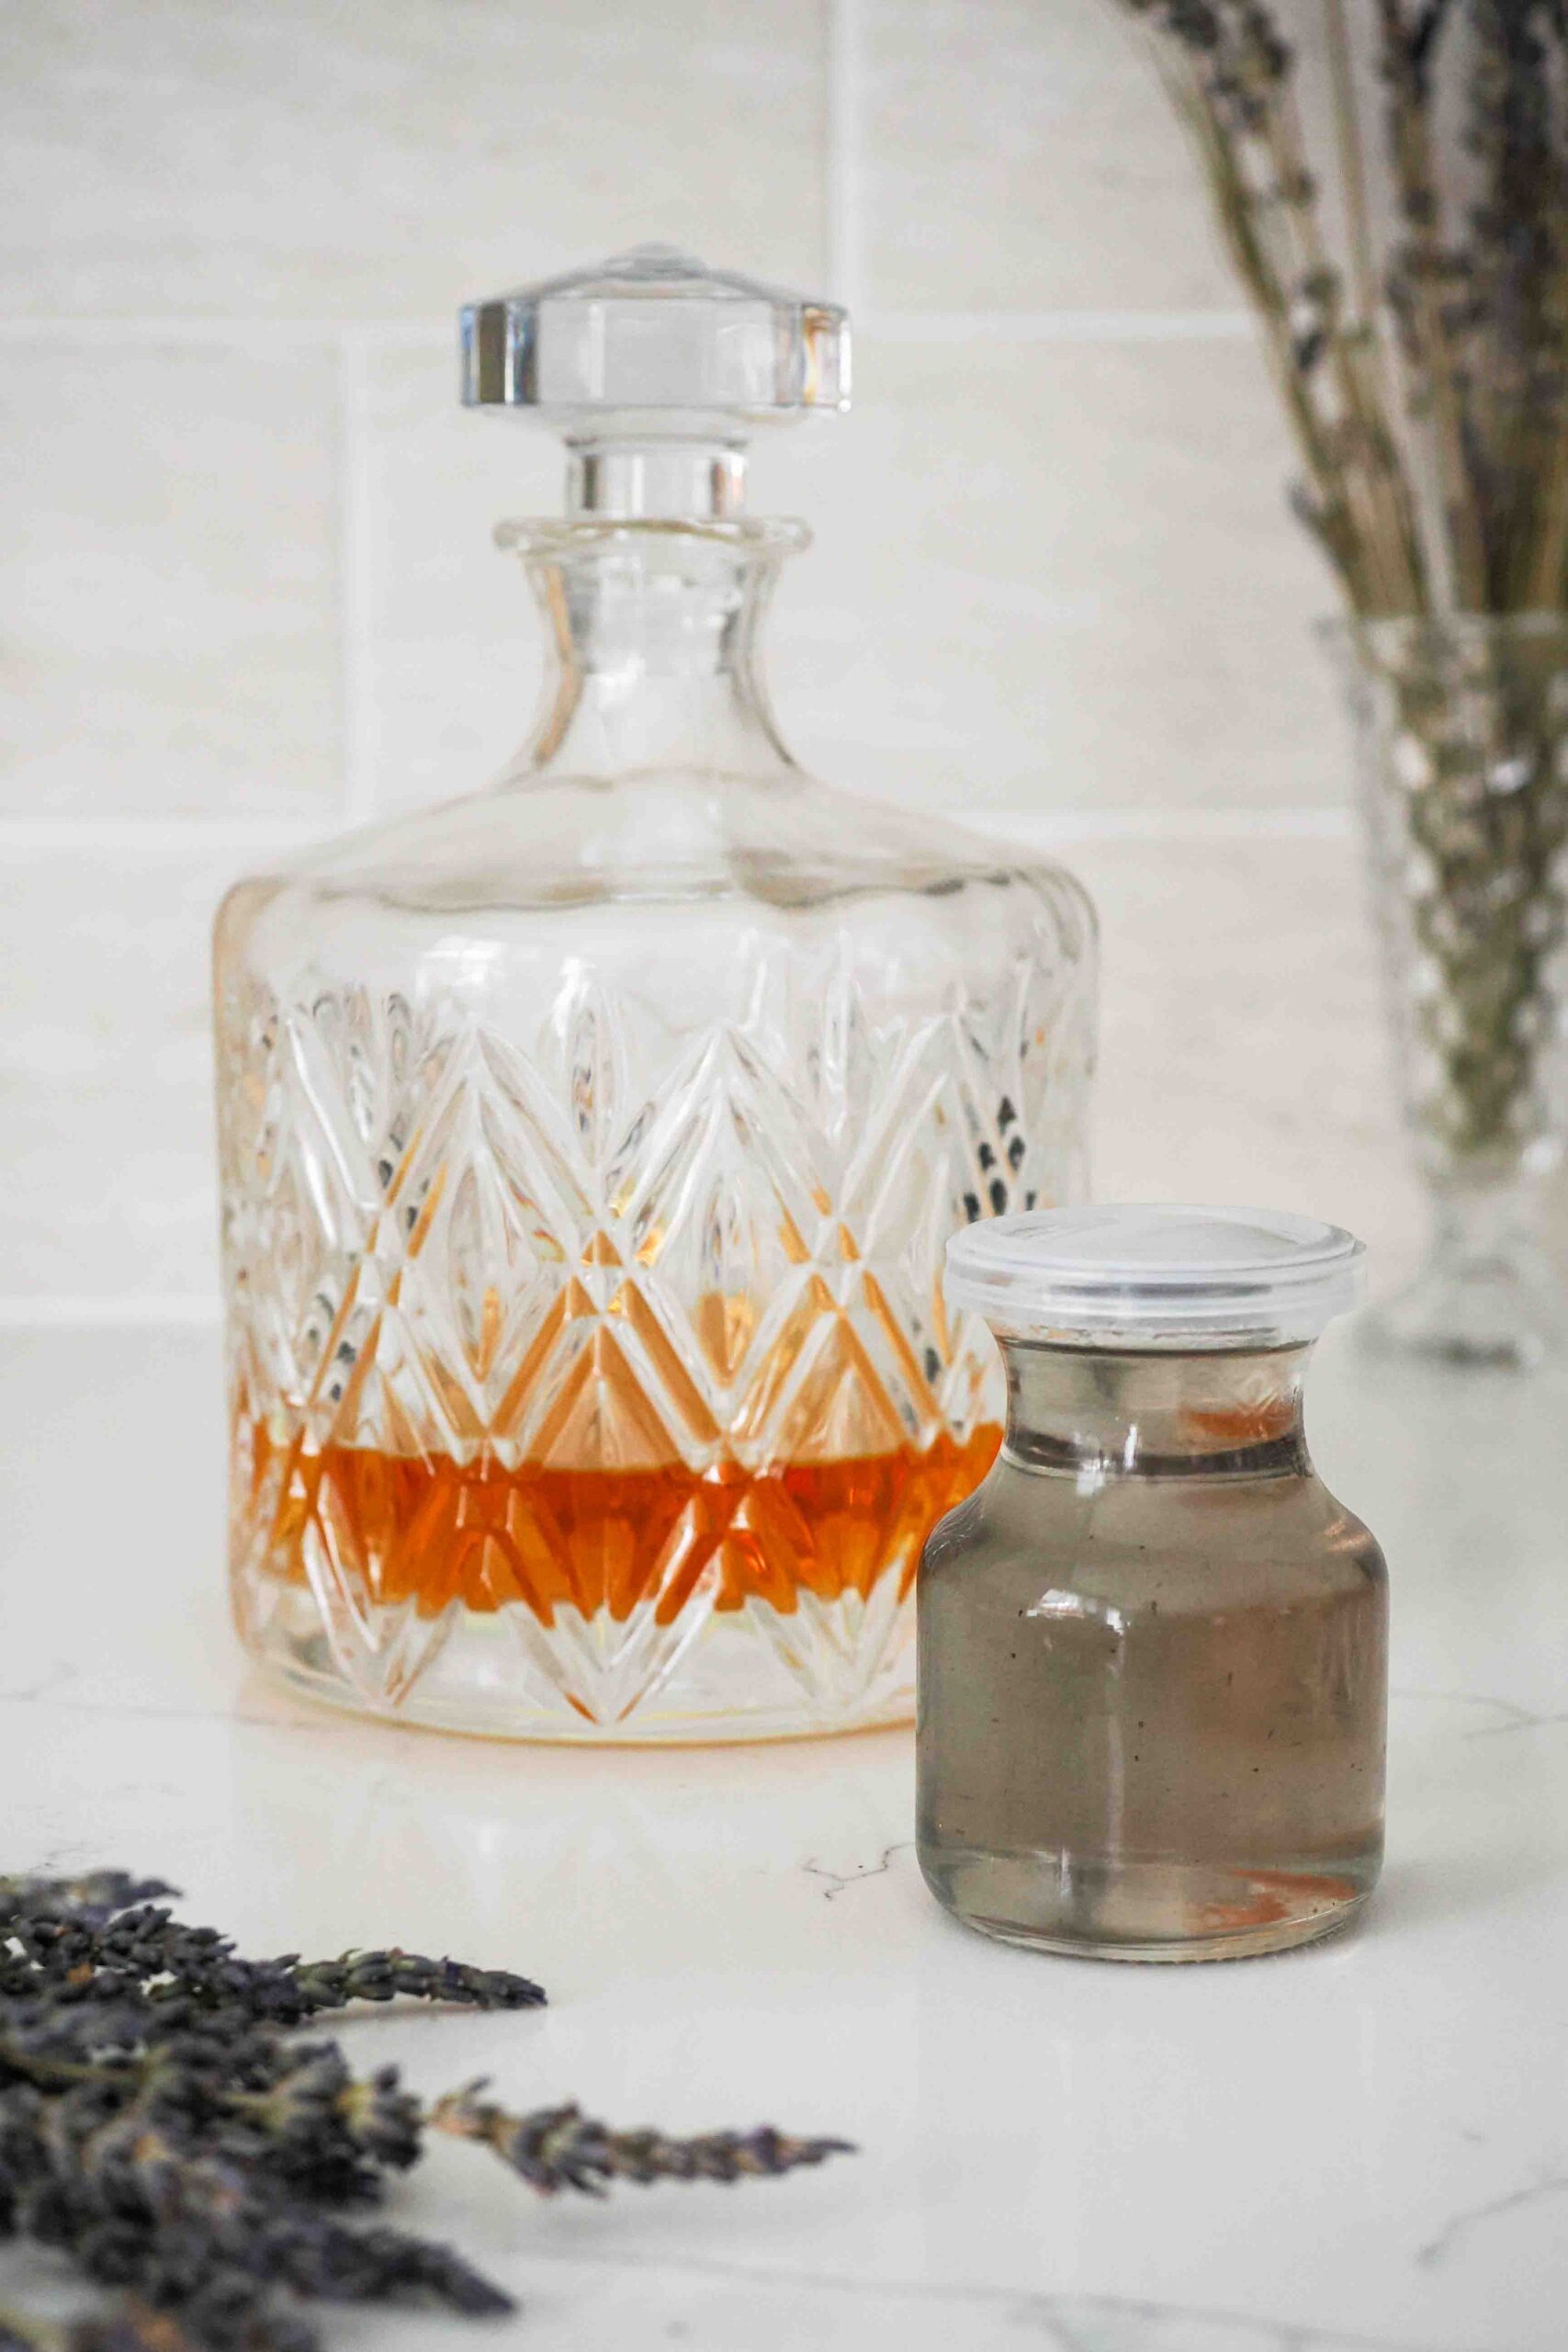 A decanter of whiskey and a bottle of lavender syrup on a counter.